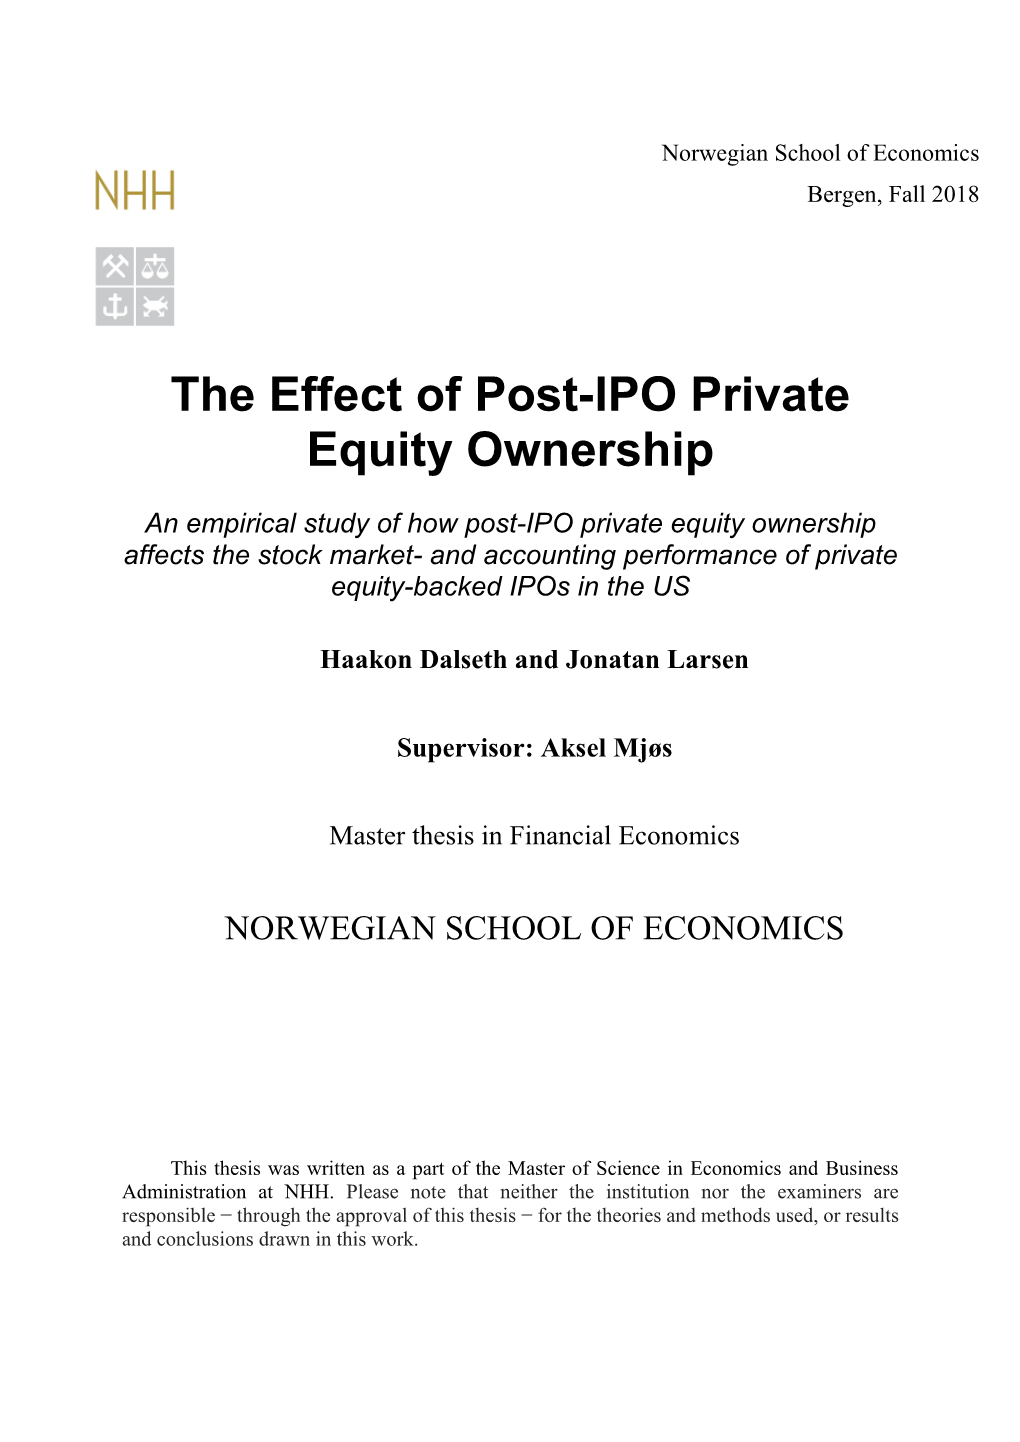 The Effect of Post-IPO Private Equity Ownership